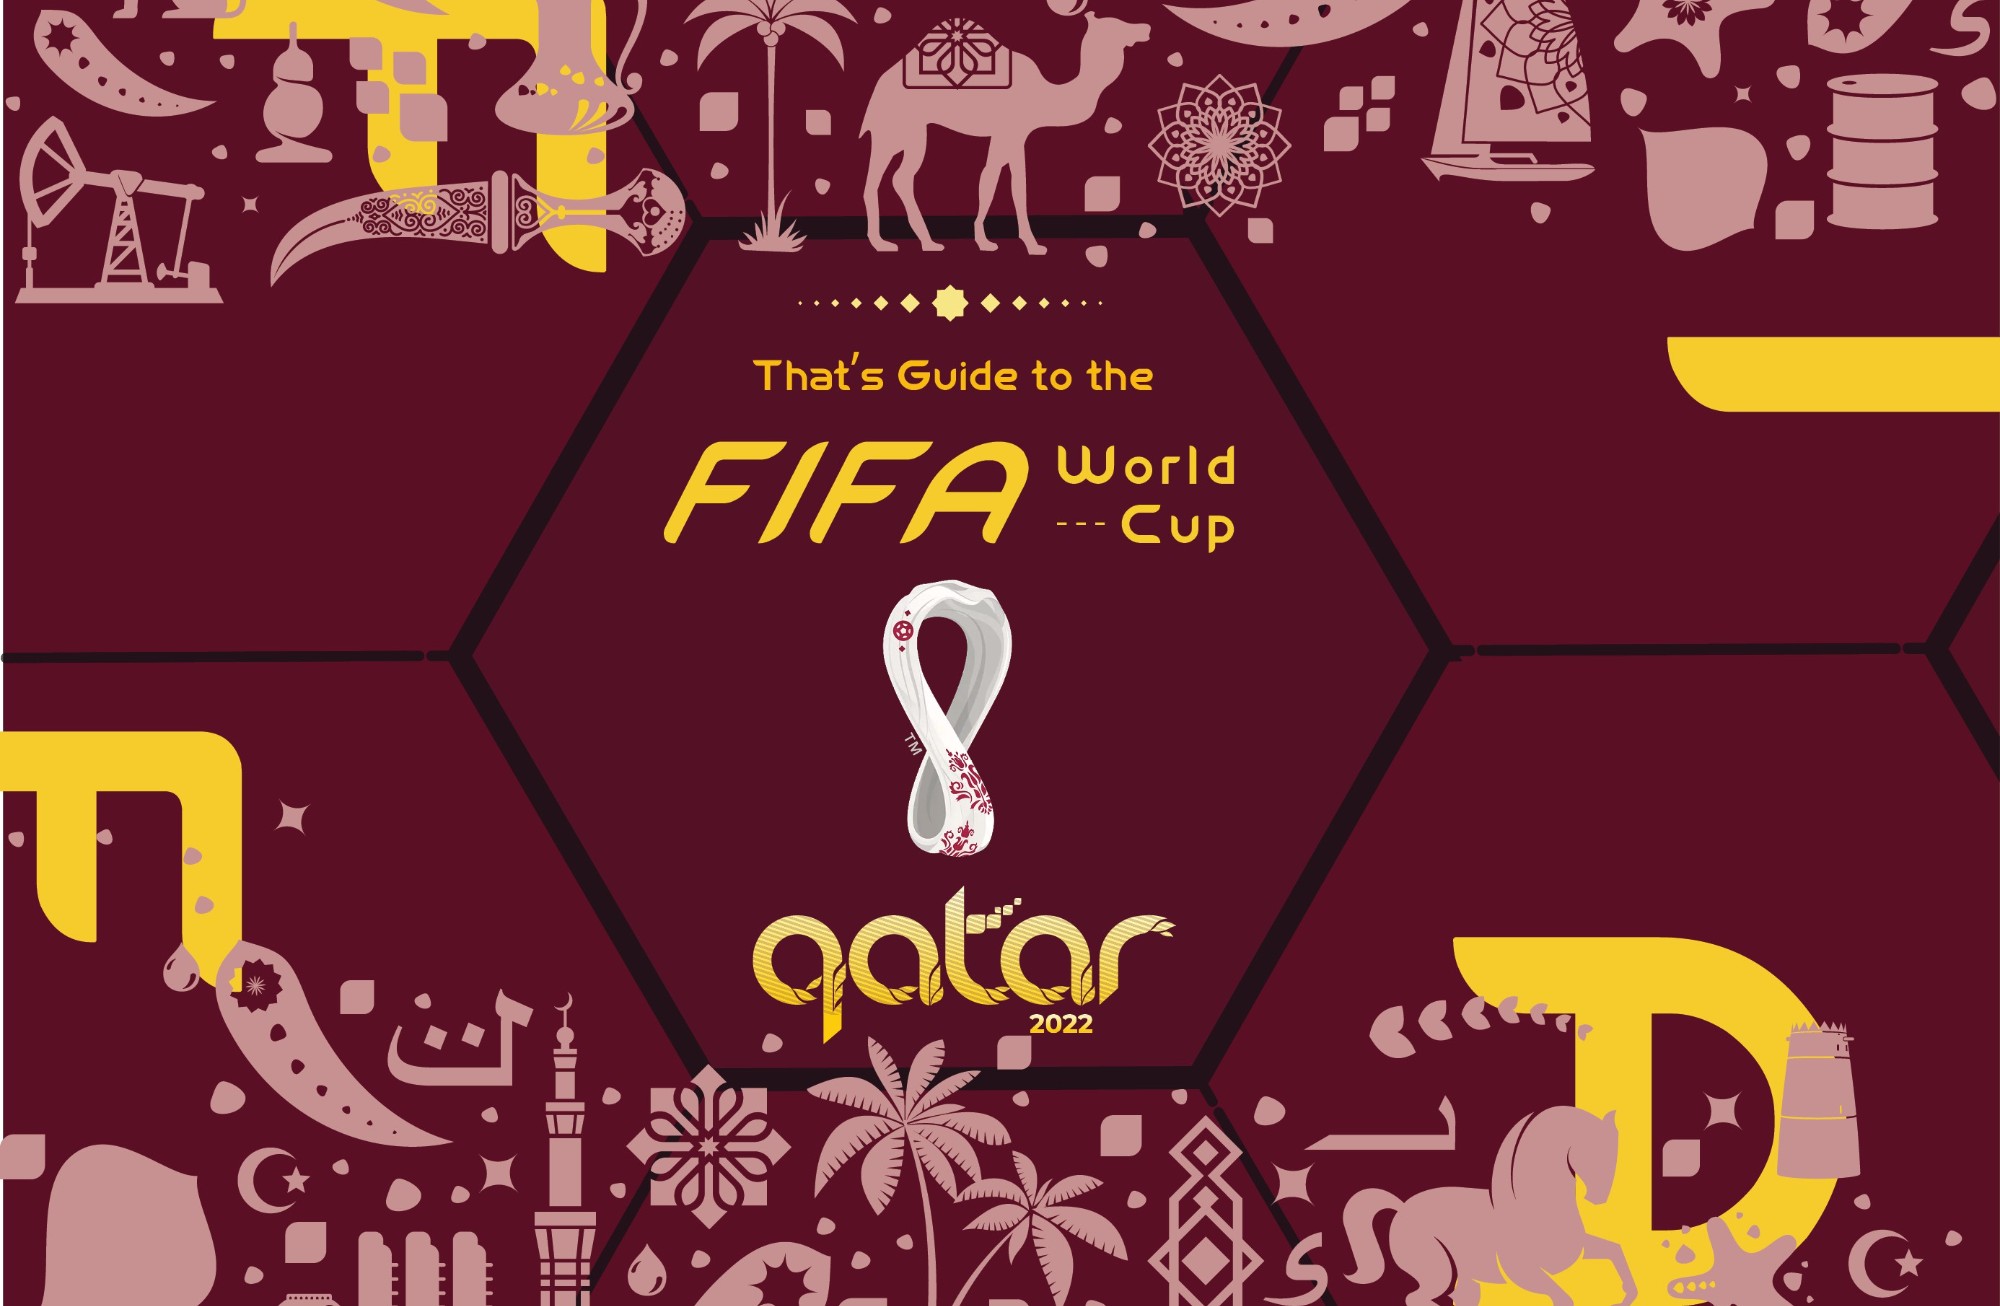 That’s Guide to the FIFA World Cup Qatar 2022: Group E